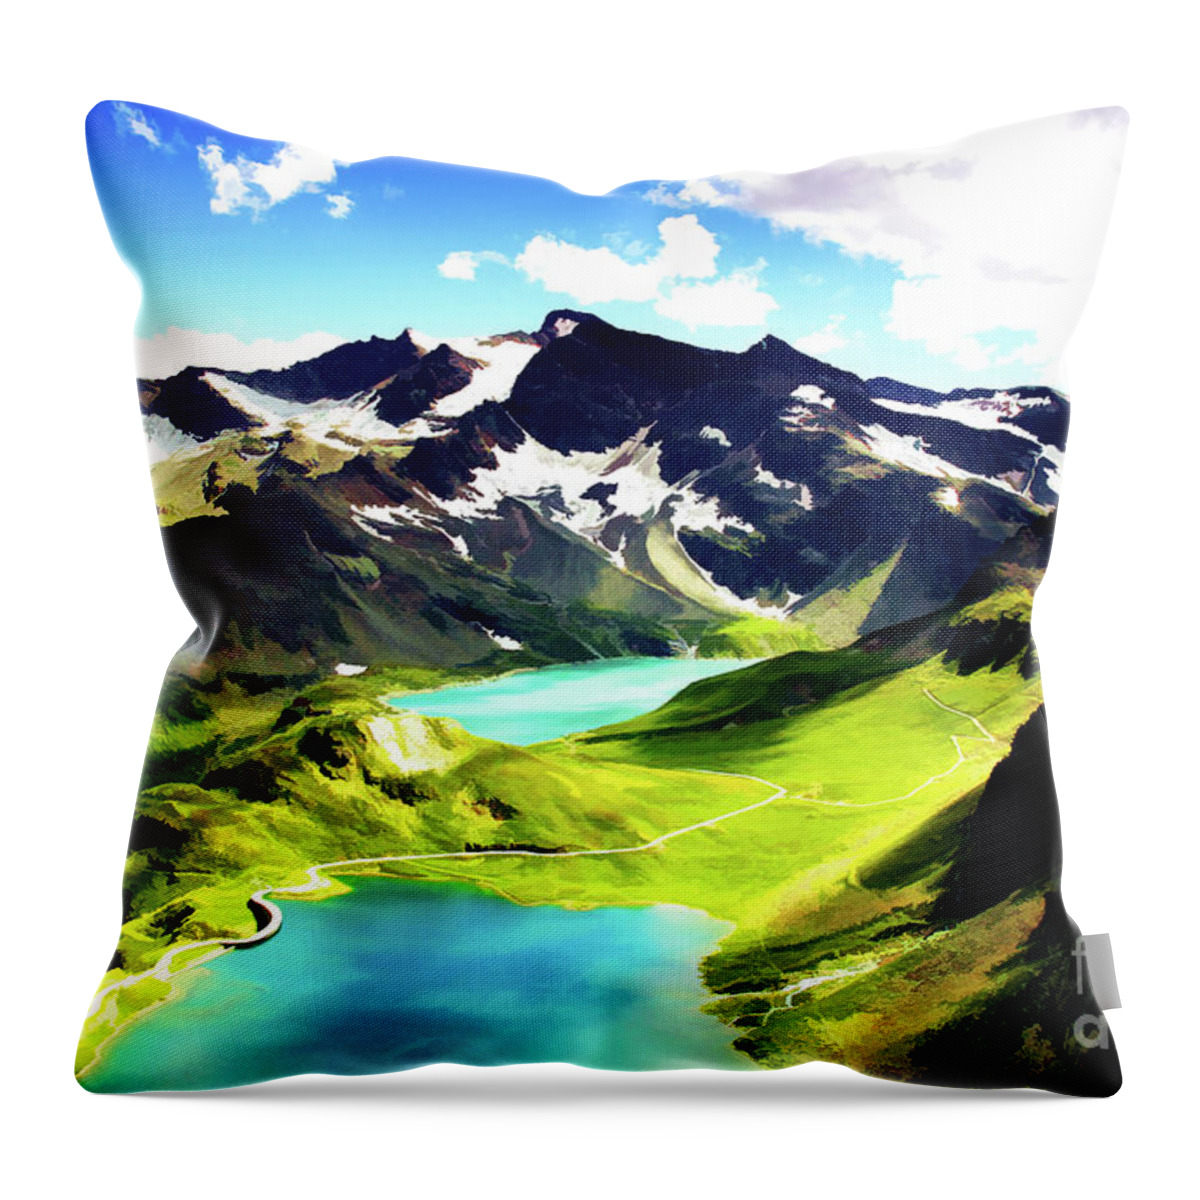 Landscape Throw Pillow featuring the painting Swiss Alps by Eva Sawyer